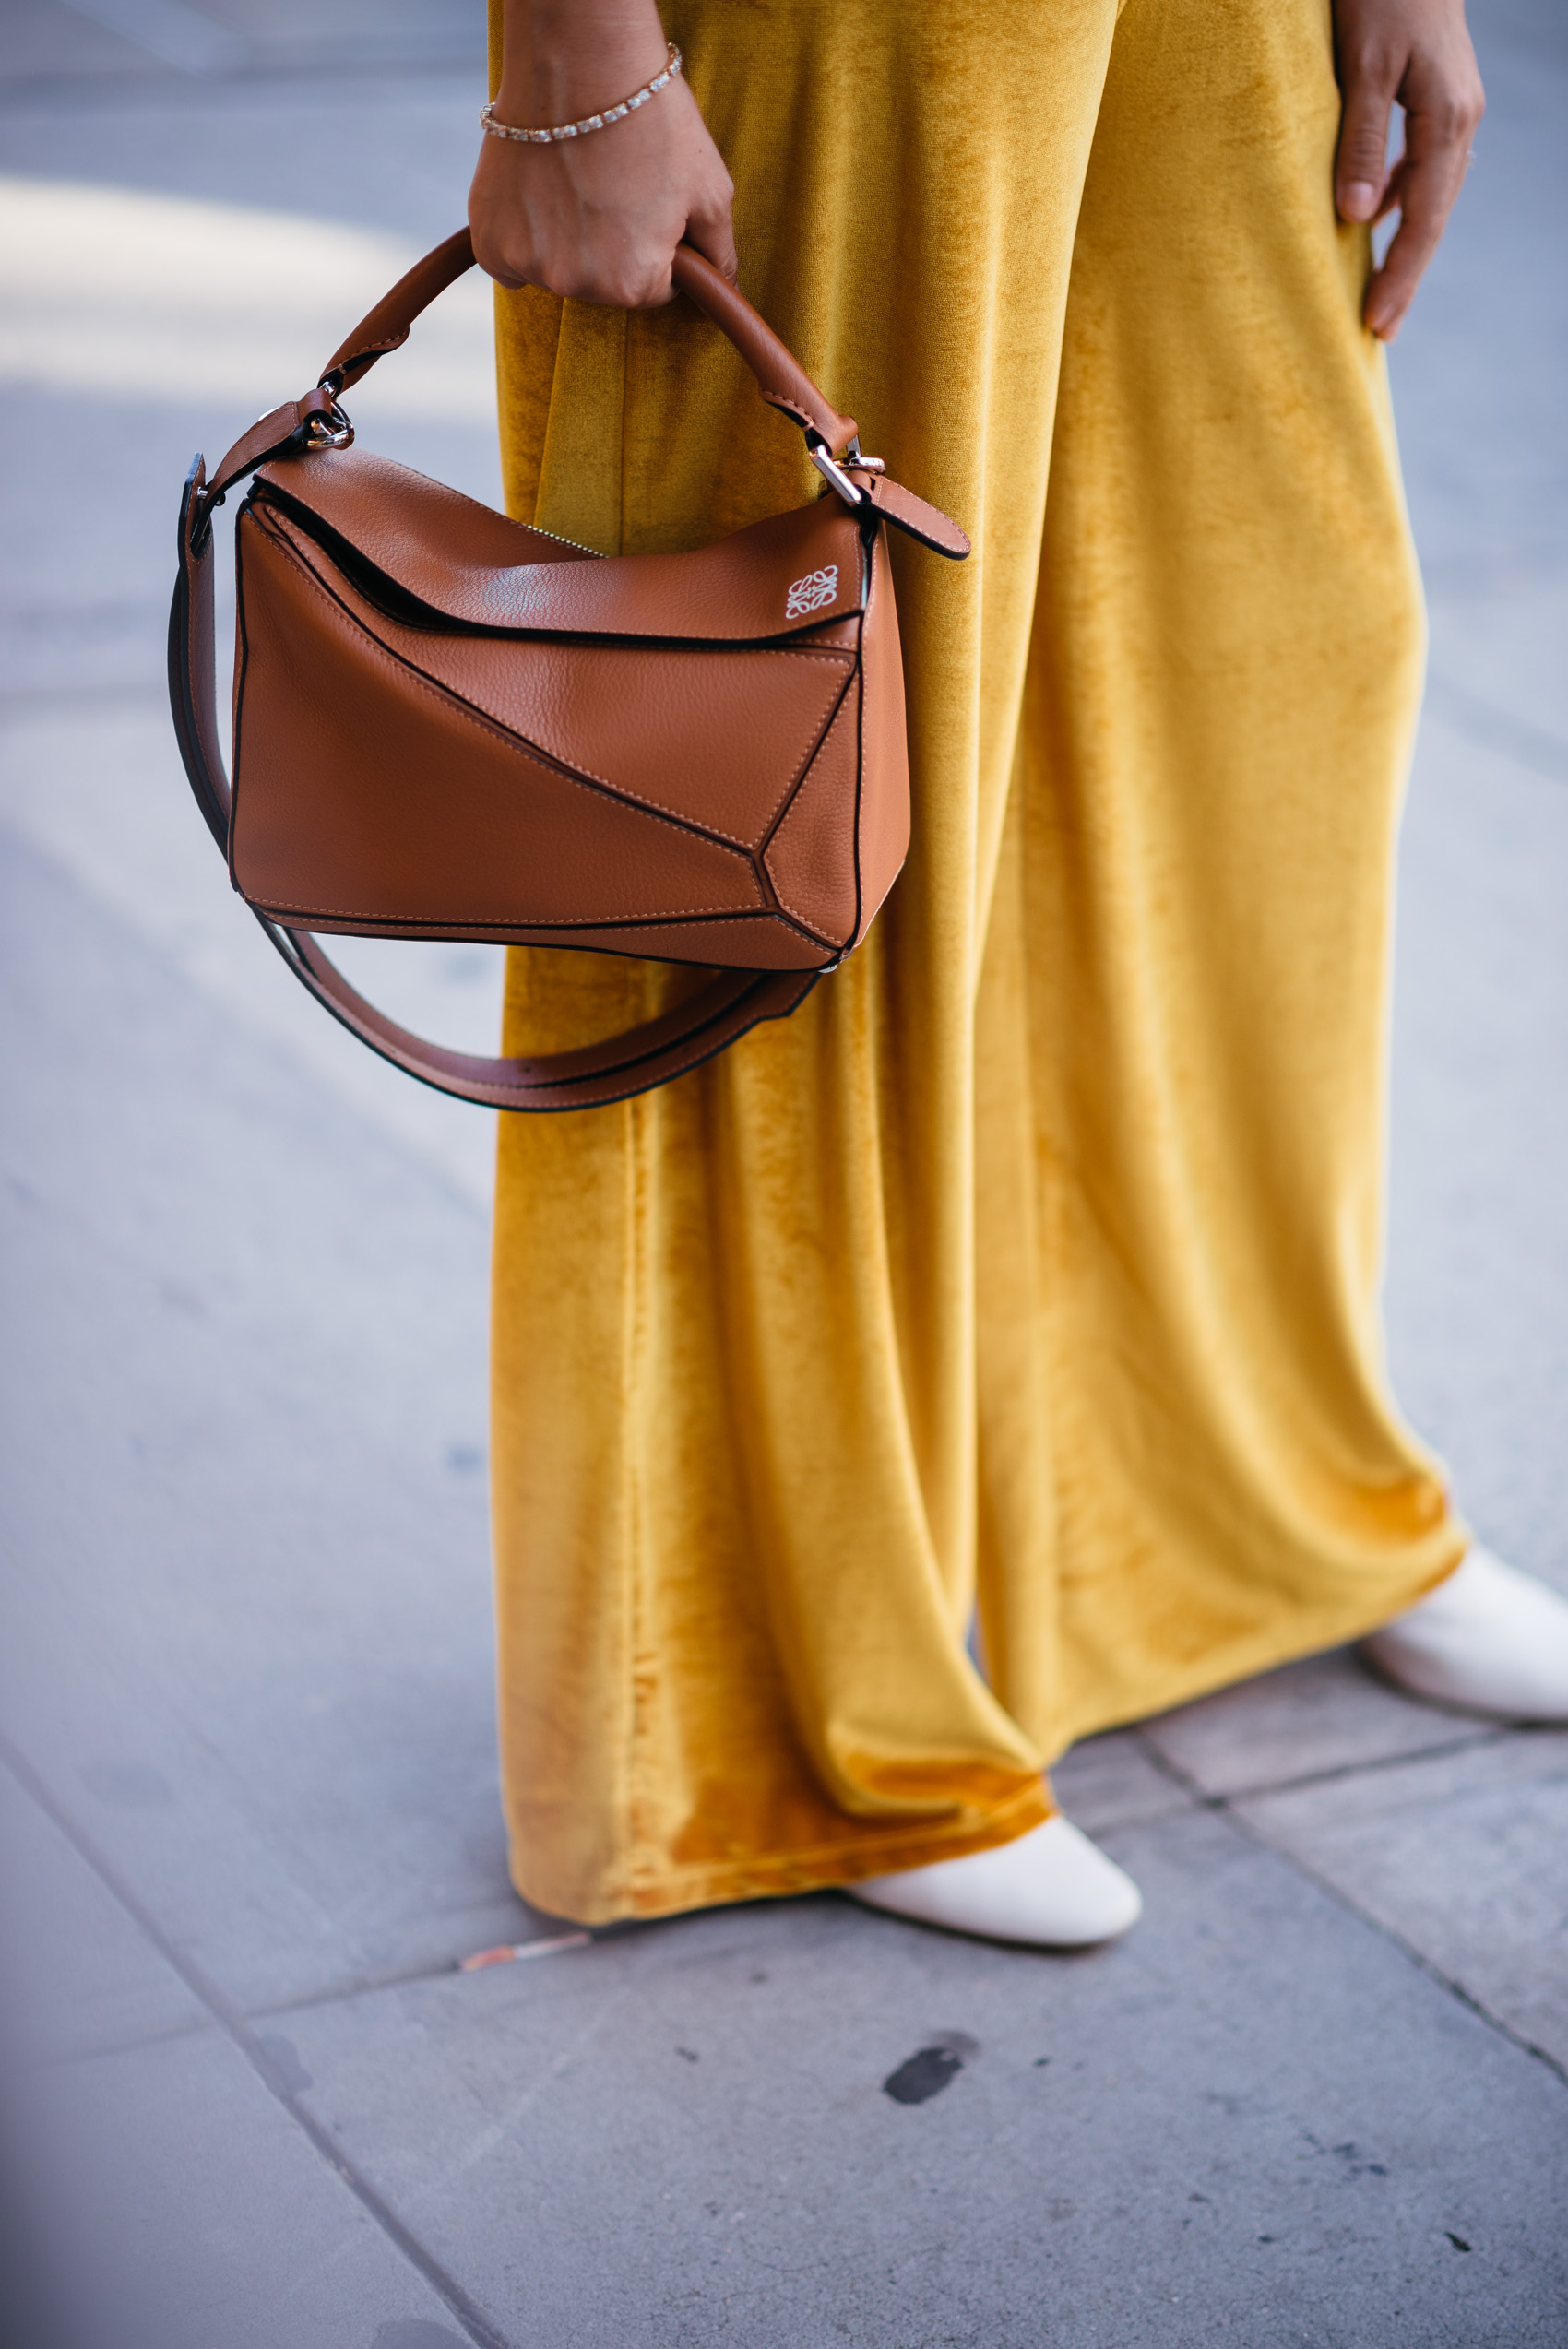 Maristella wearing mustard yellow velvet and a Loewe small puzzle bag in tan leather